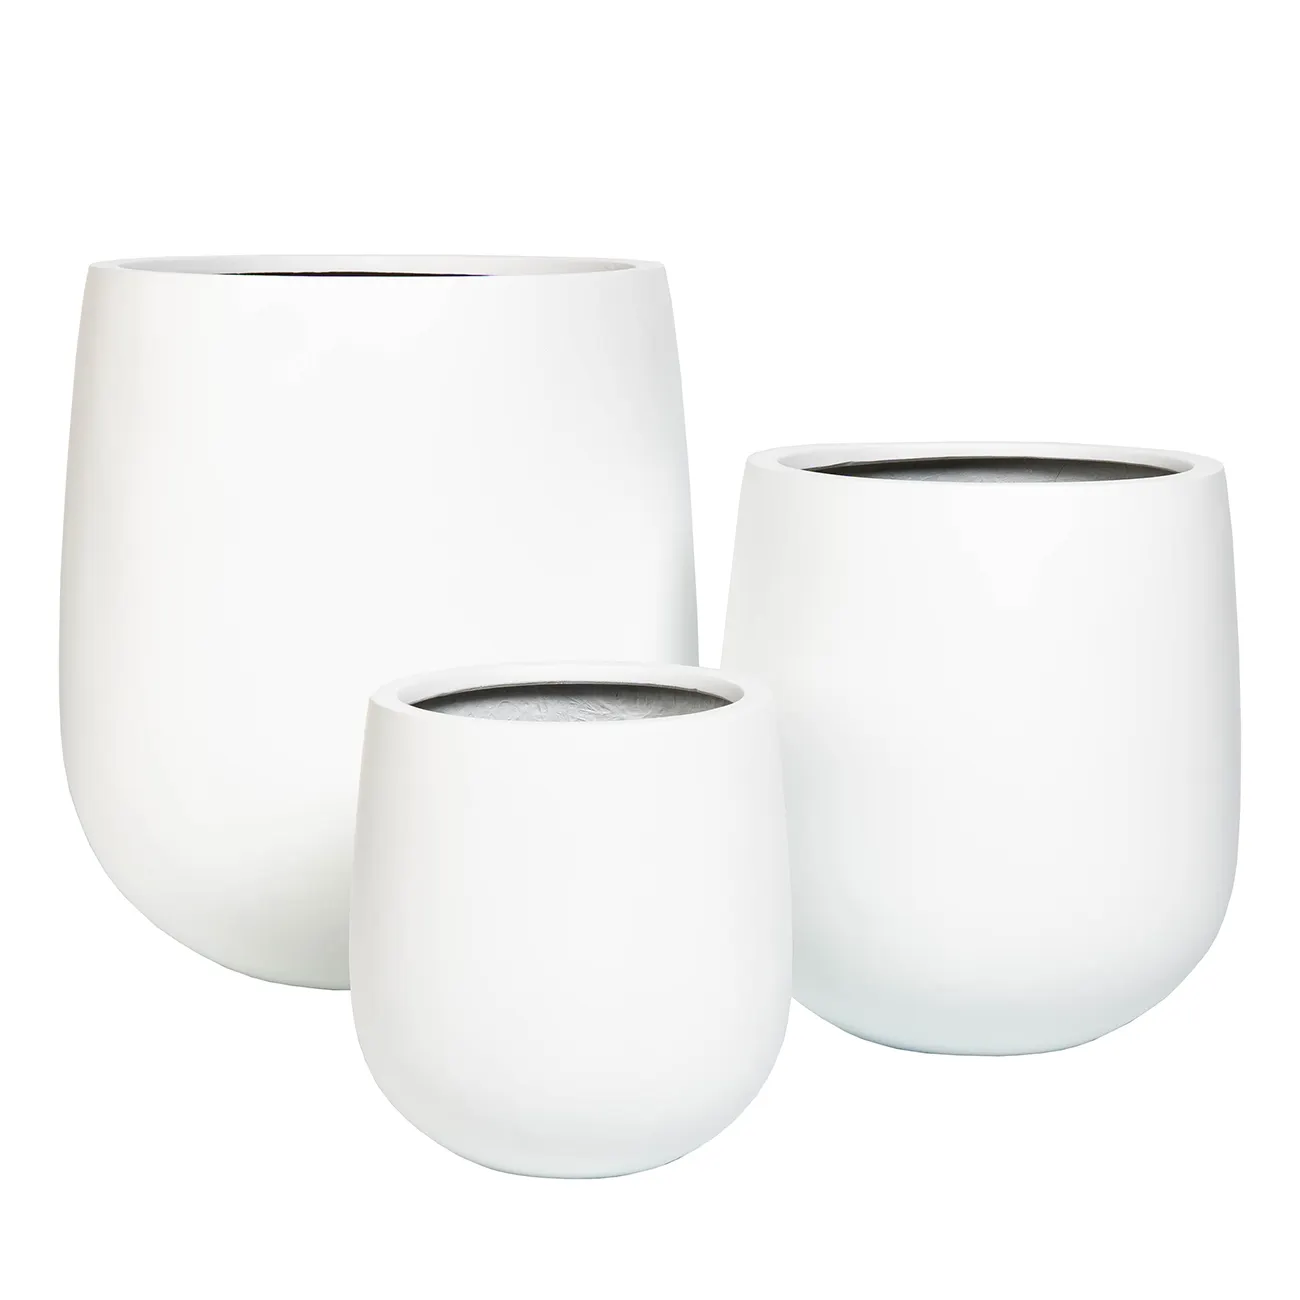 Winter collection smooth painting white fiberglass pots and planter large sizes for flower garden outdoor